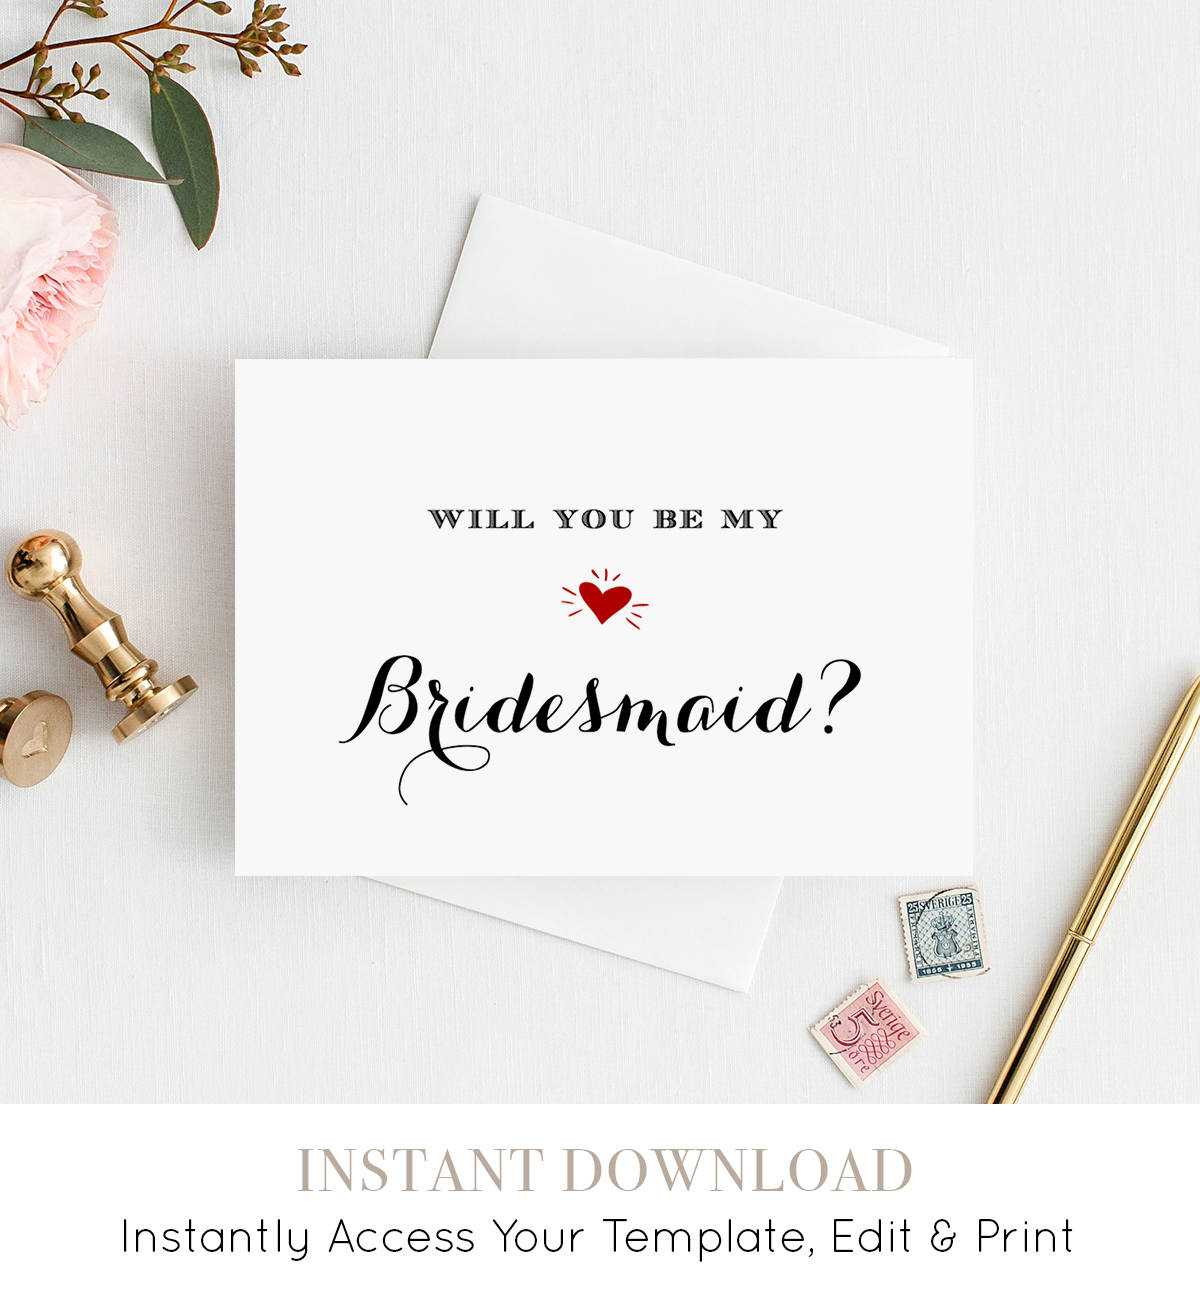 Bridesmaid Card Template, Printable Will You Be My Within Will You Be My Bridesmaid Card Template